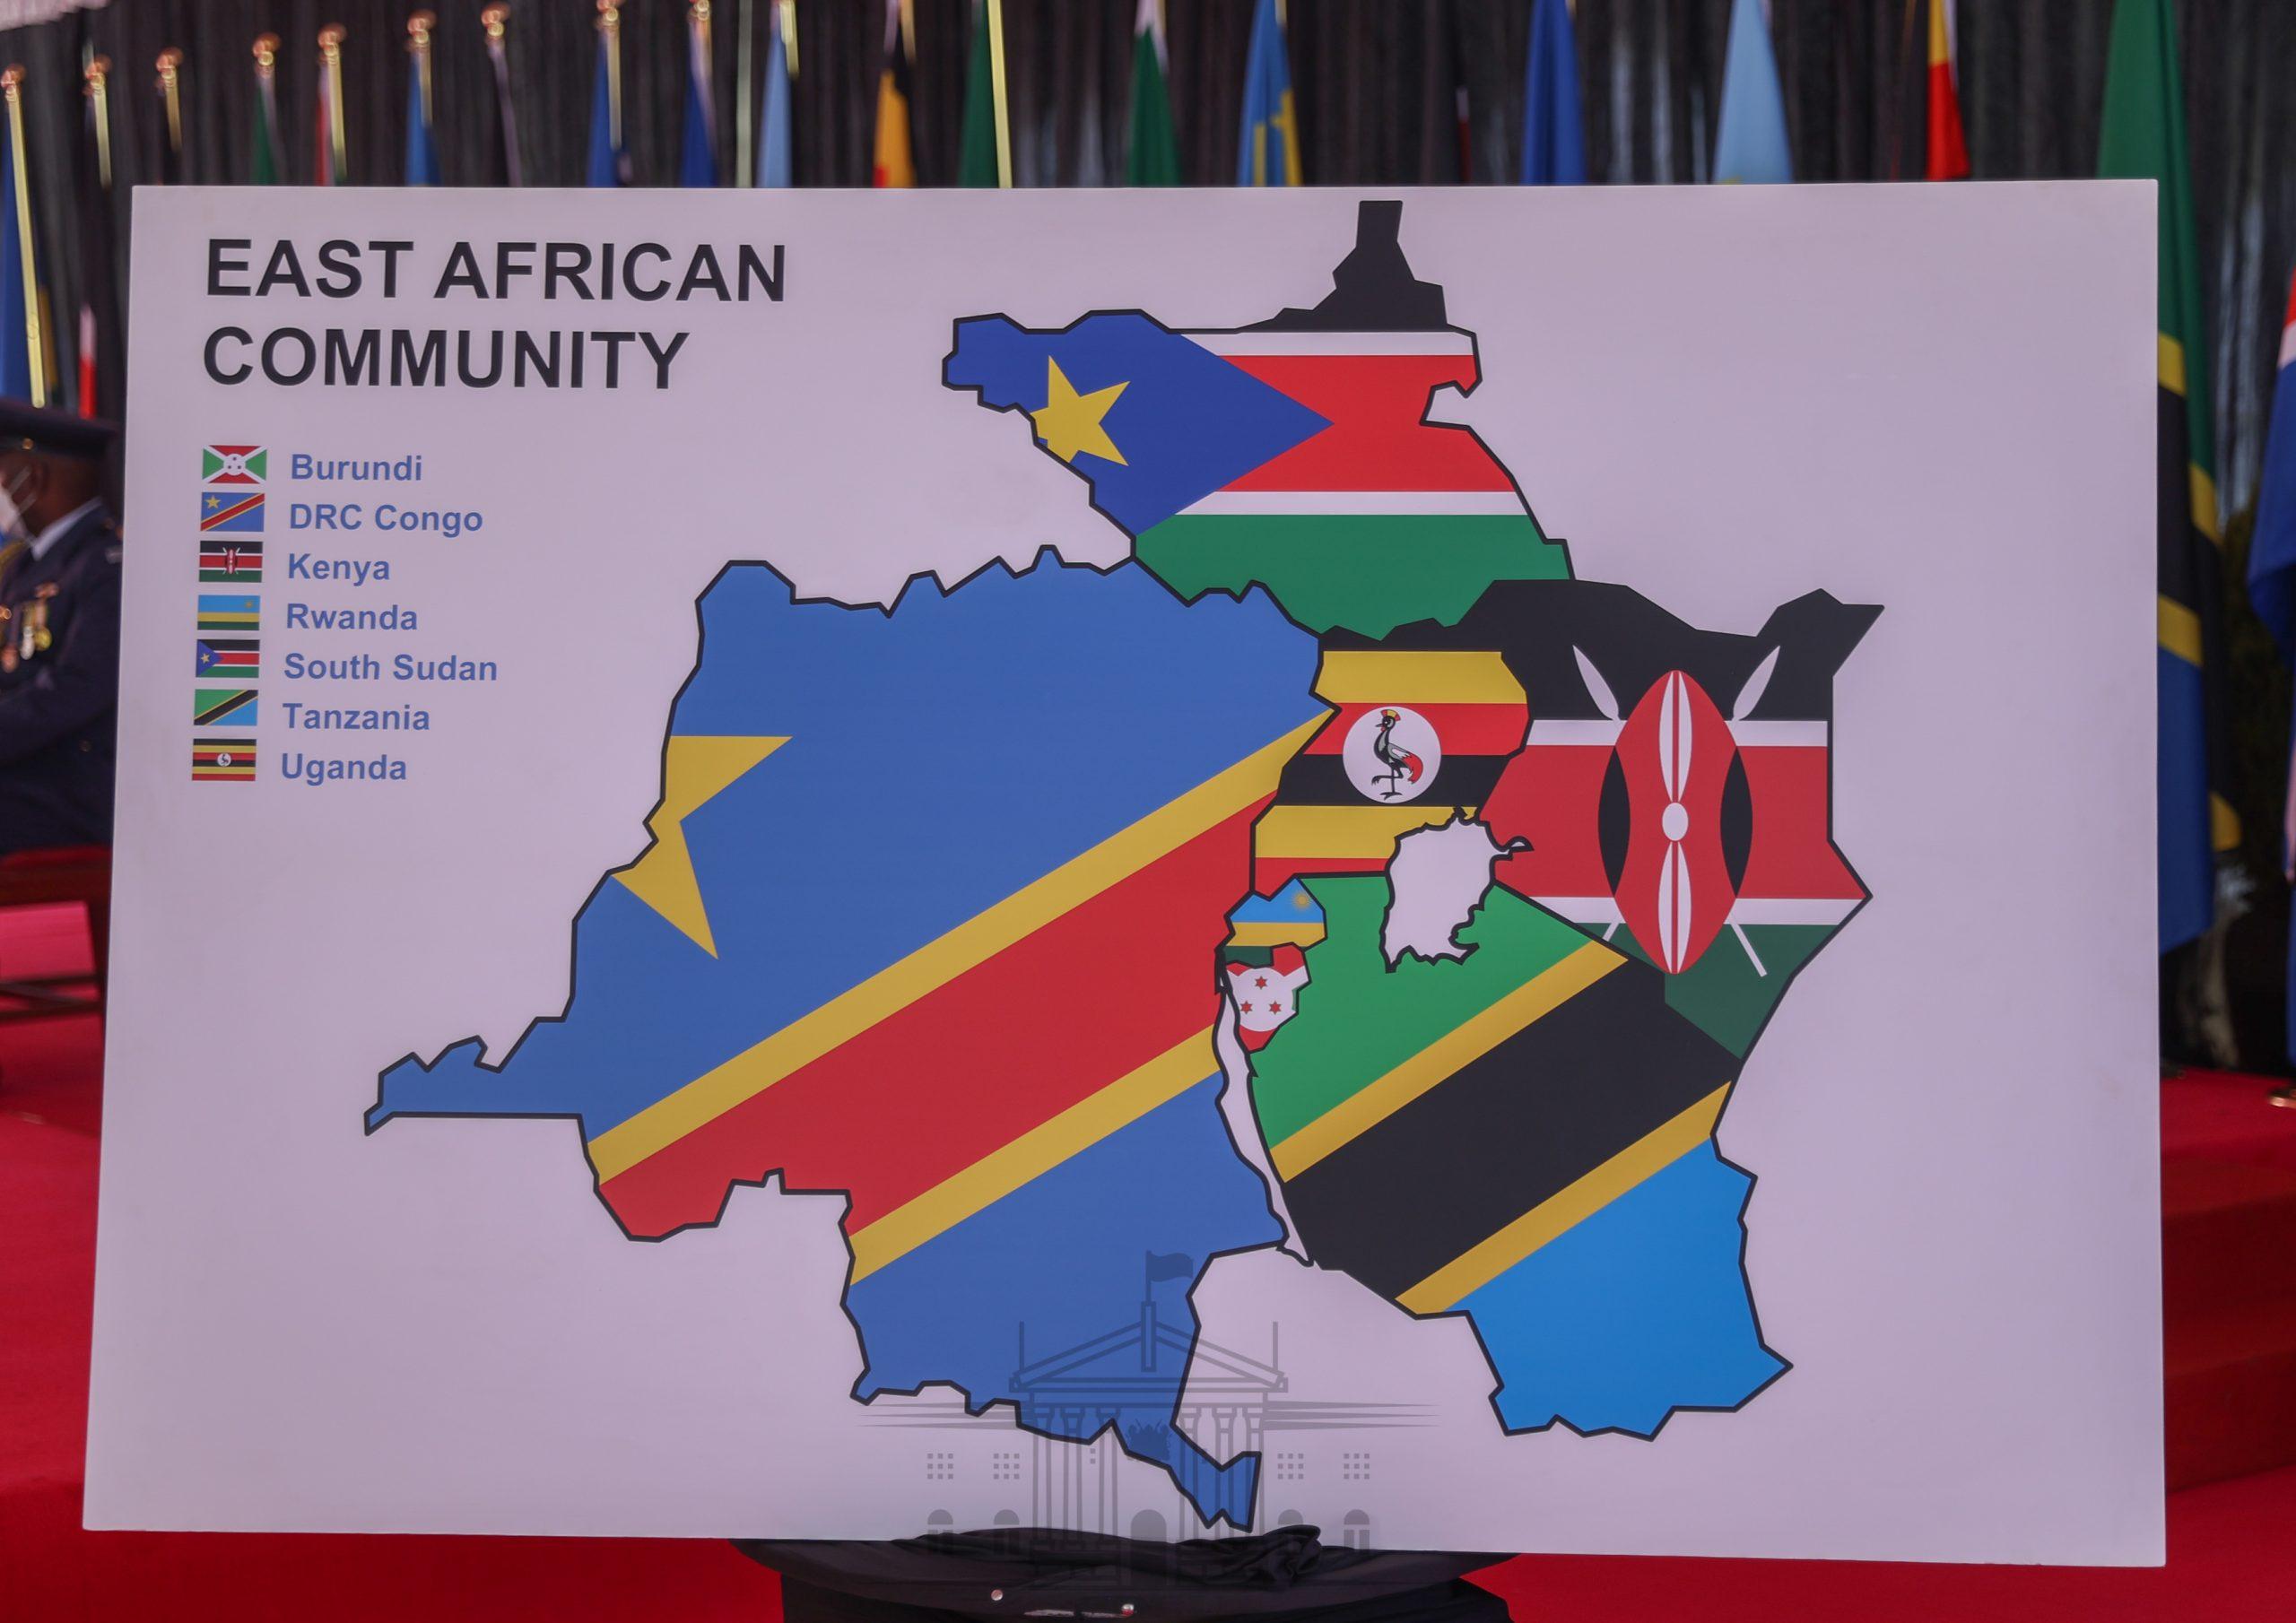 The new EAC map. This is after the admission of DR Congo into the EAC as the seventh member of the regional bloc. www.theexchange.africa